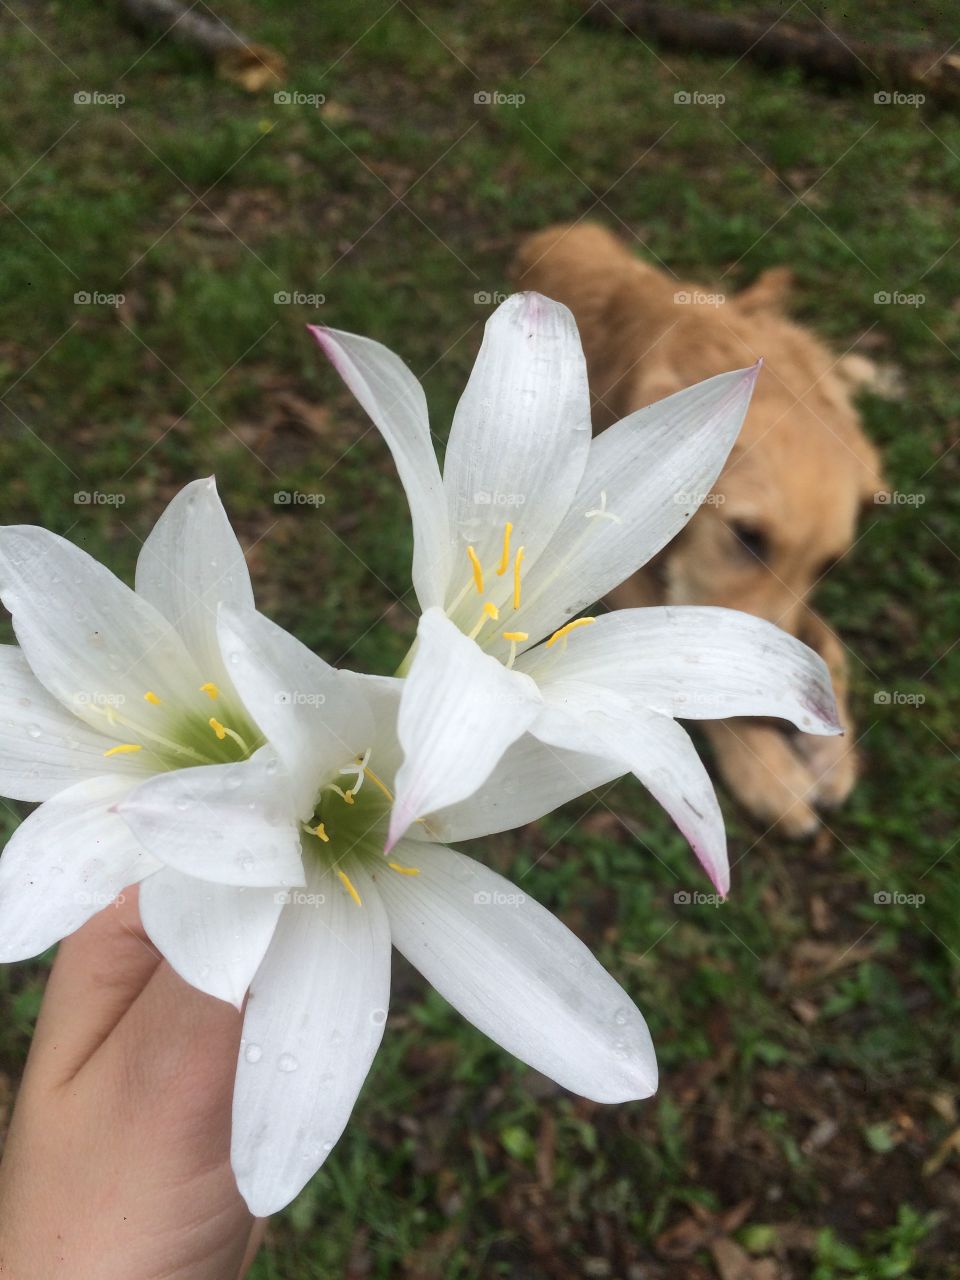 Flowers and puppy.